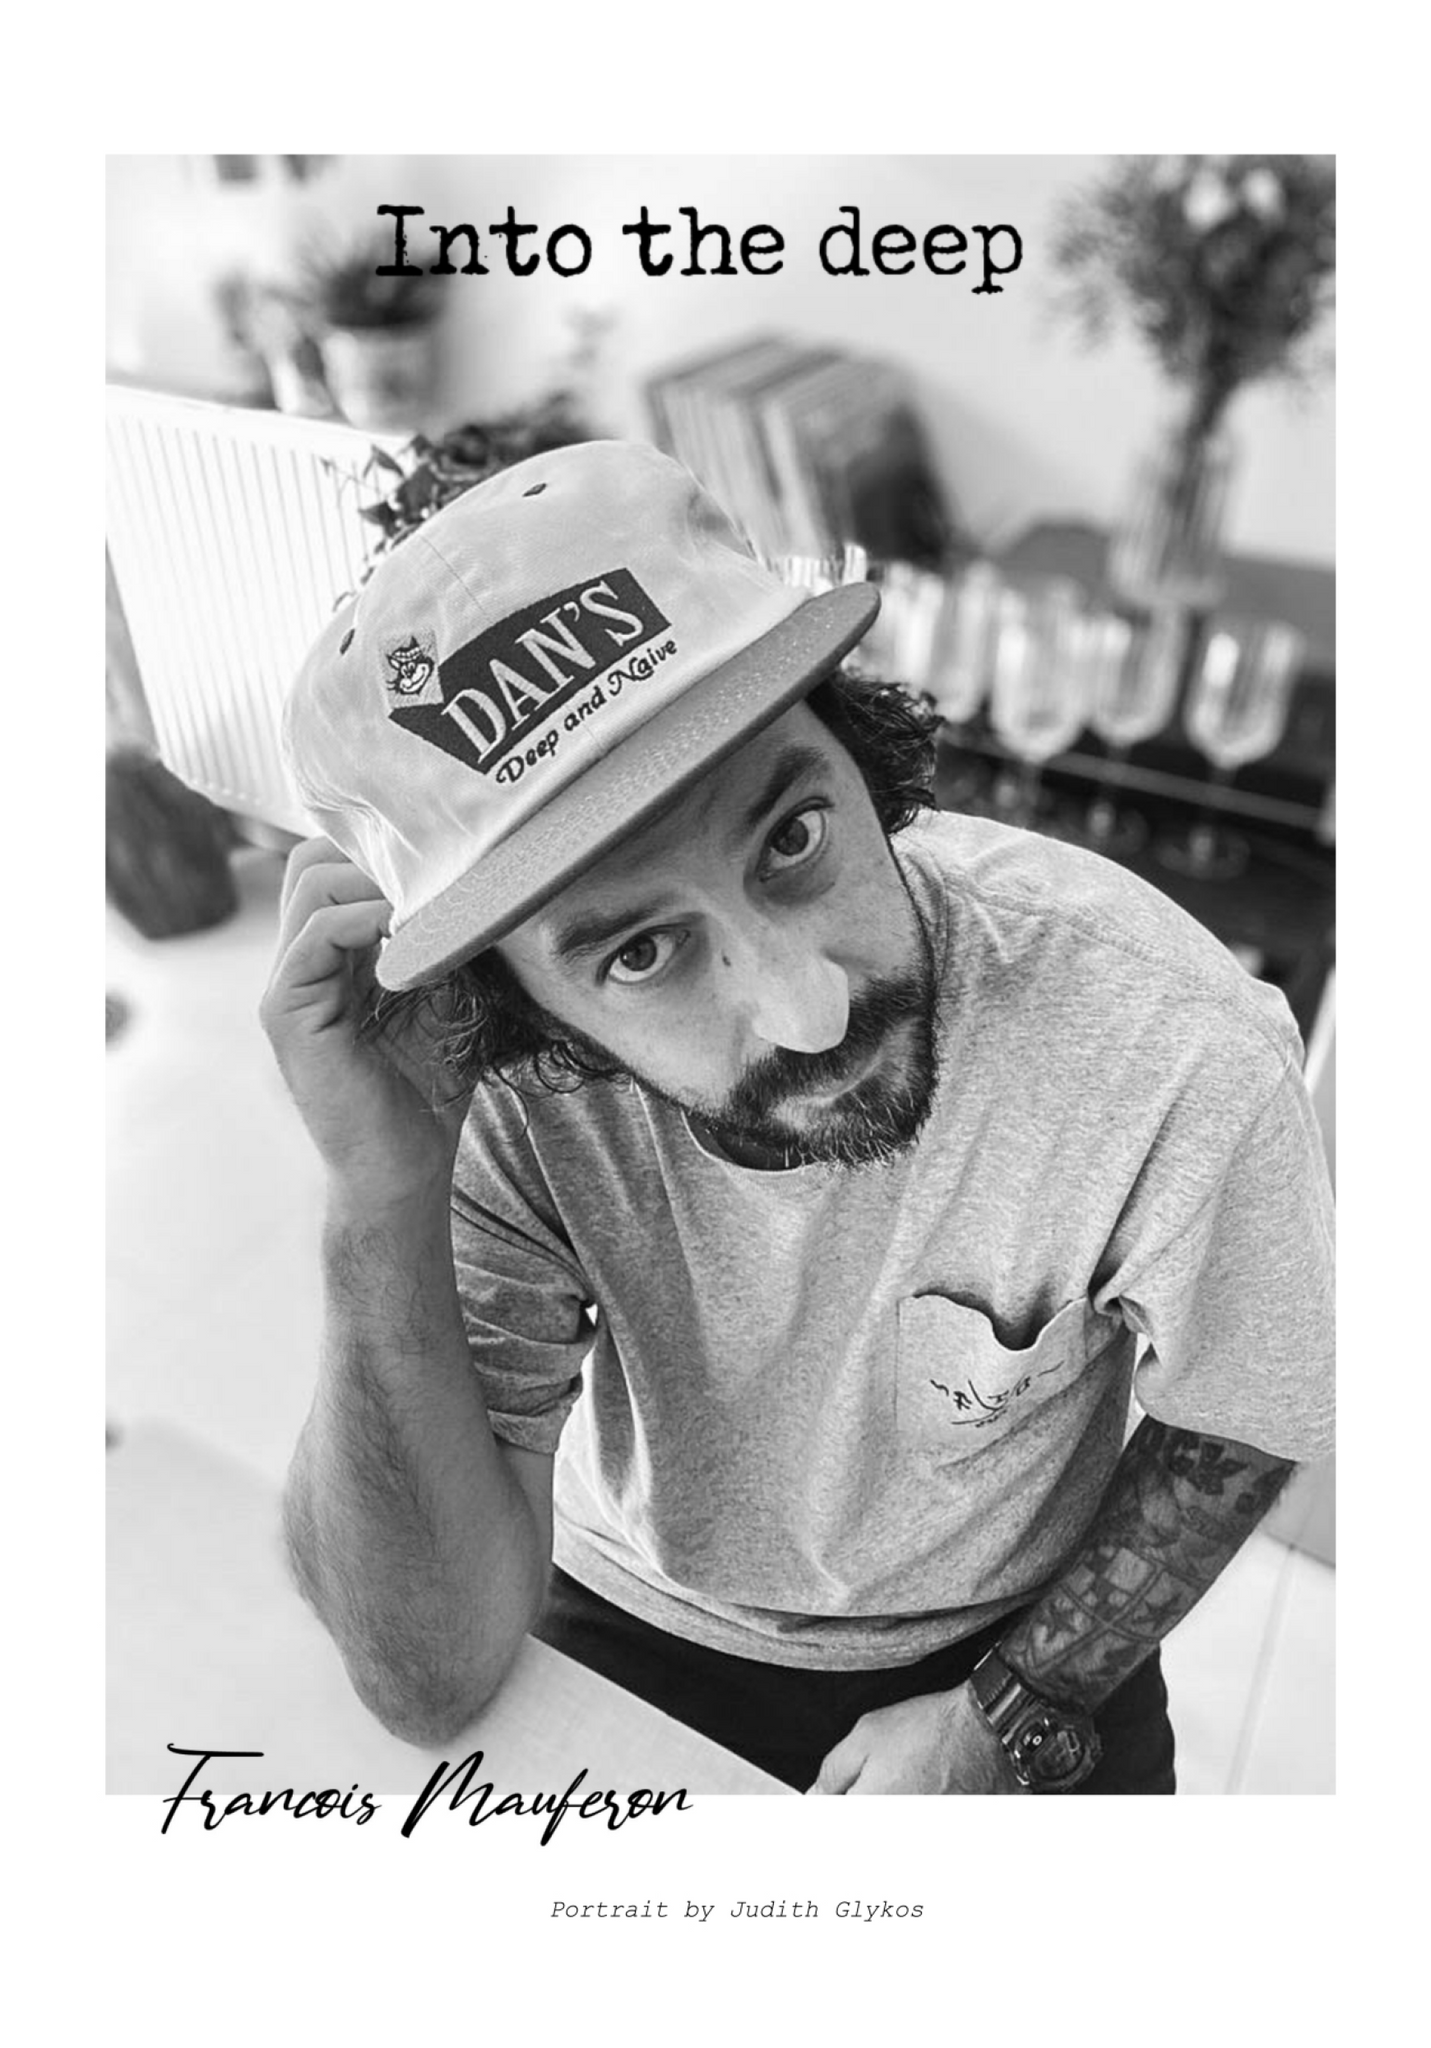 INTERVIEW: "INTO THE DEEP" DAN'S FOUNDER for TRADA SKATEMAG